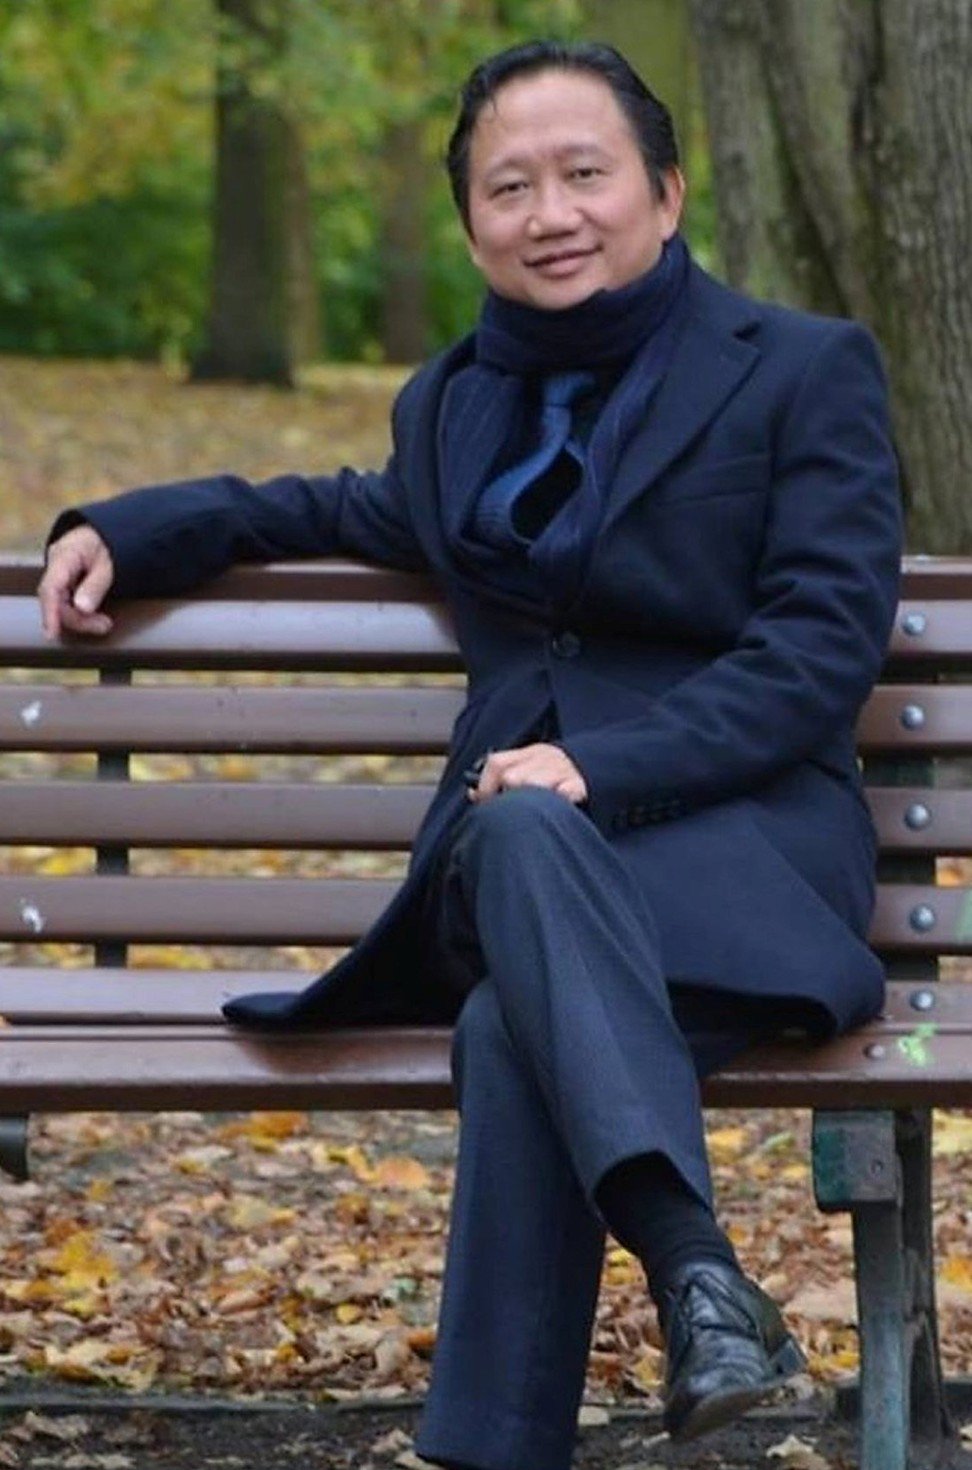 Trinh Xuan Thanh, a former official at state oil company PetroVietnam, sits on a park bench in Berlin in this undated photo. Photo: Reuters